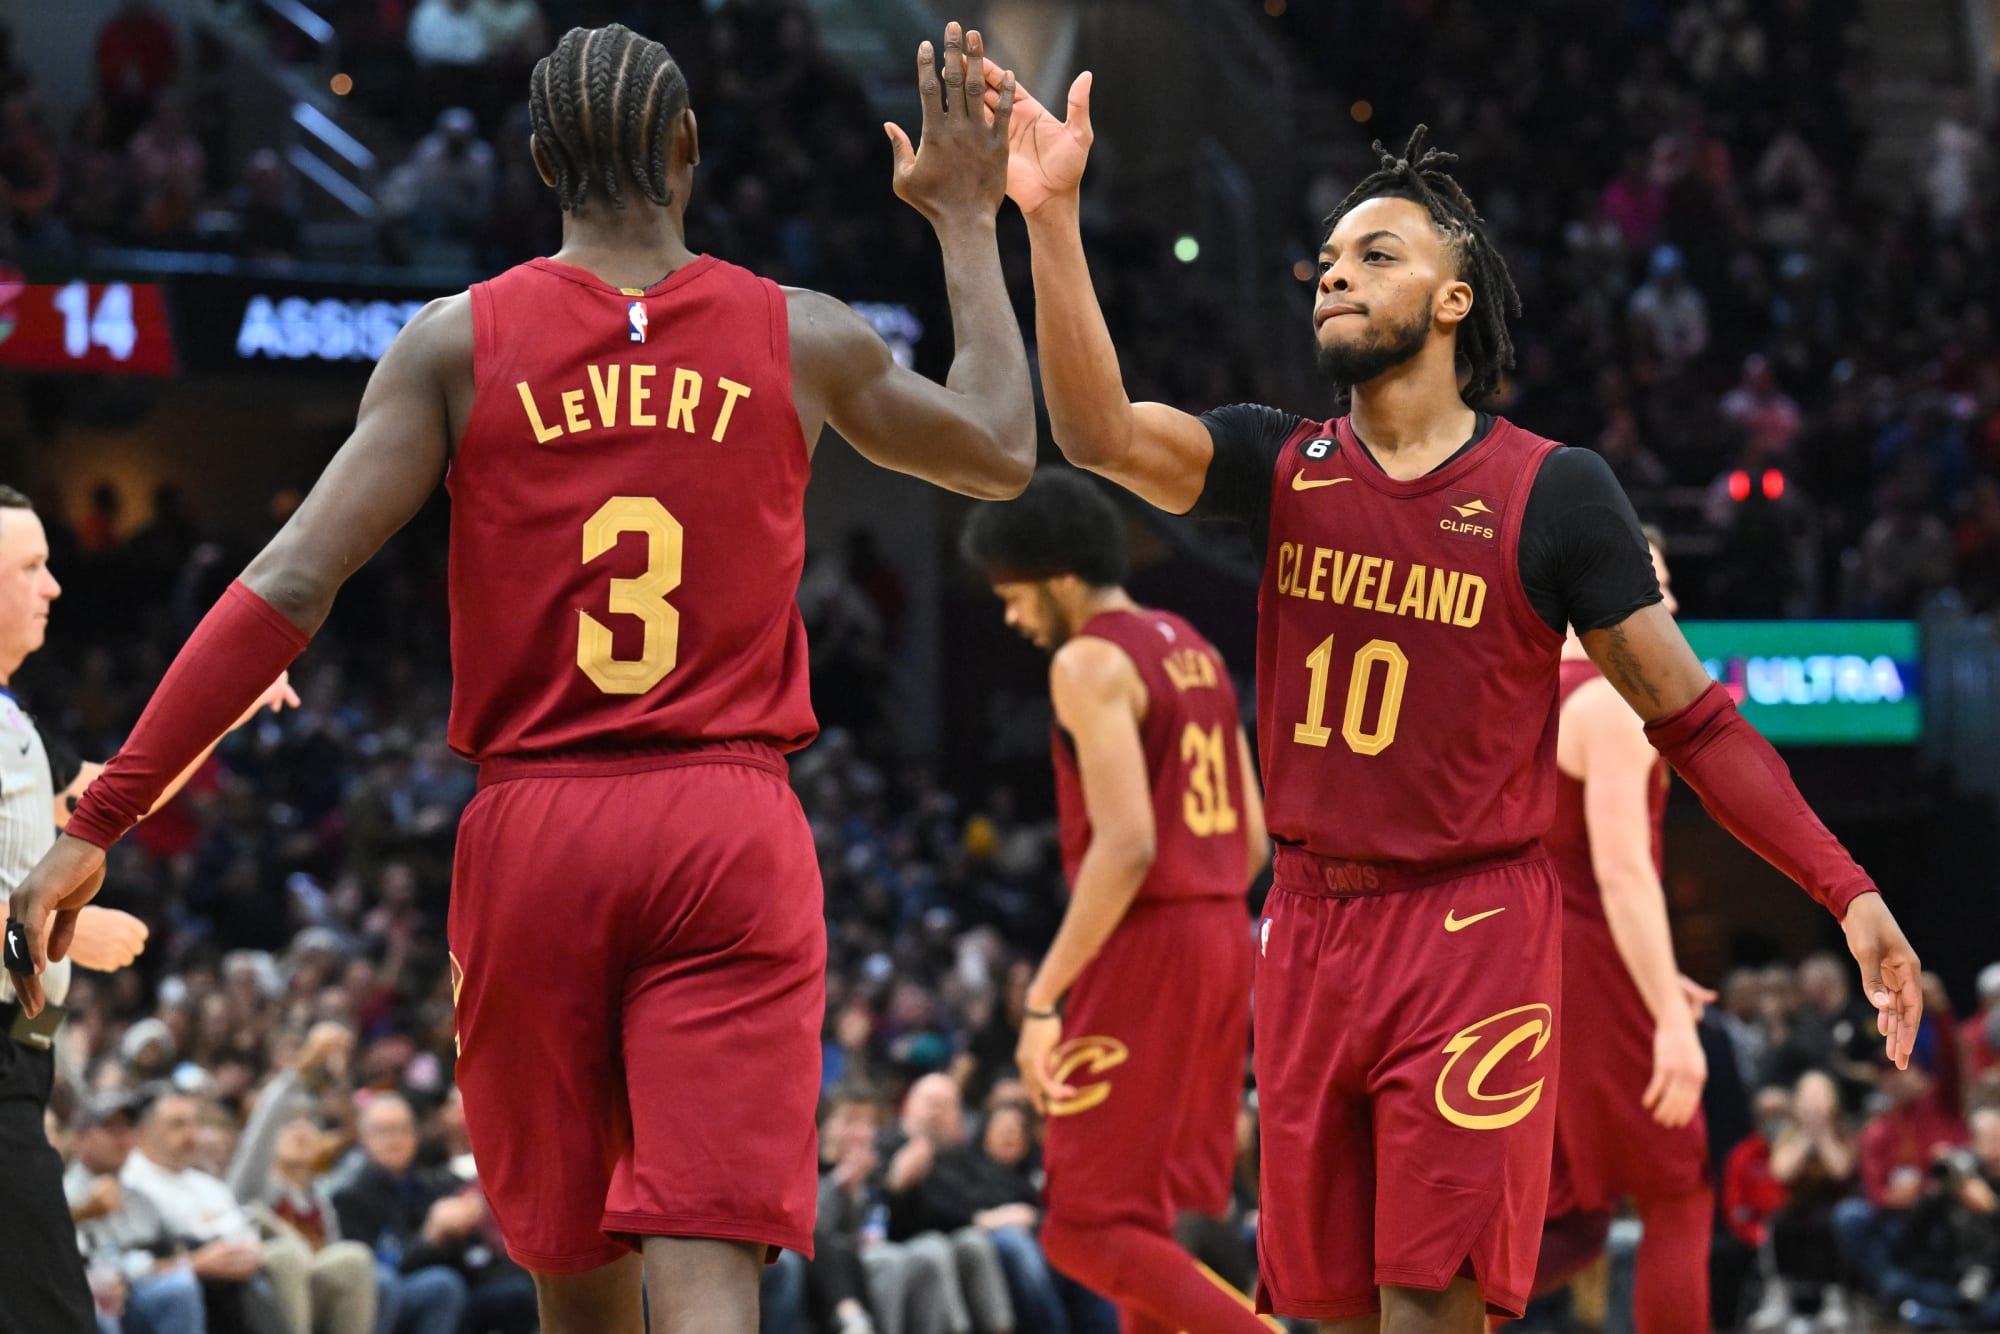 This star guard earned Cleveland Cavaliers Player of the Week